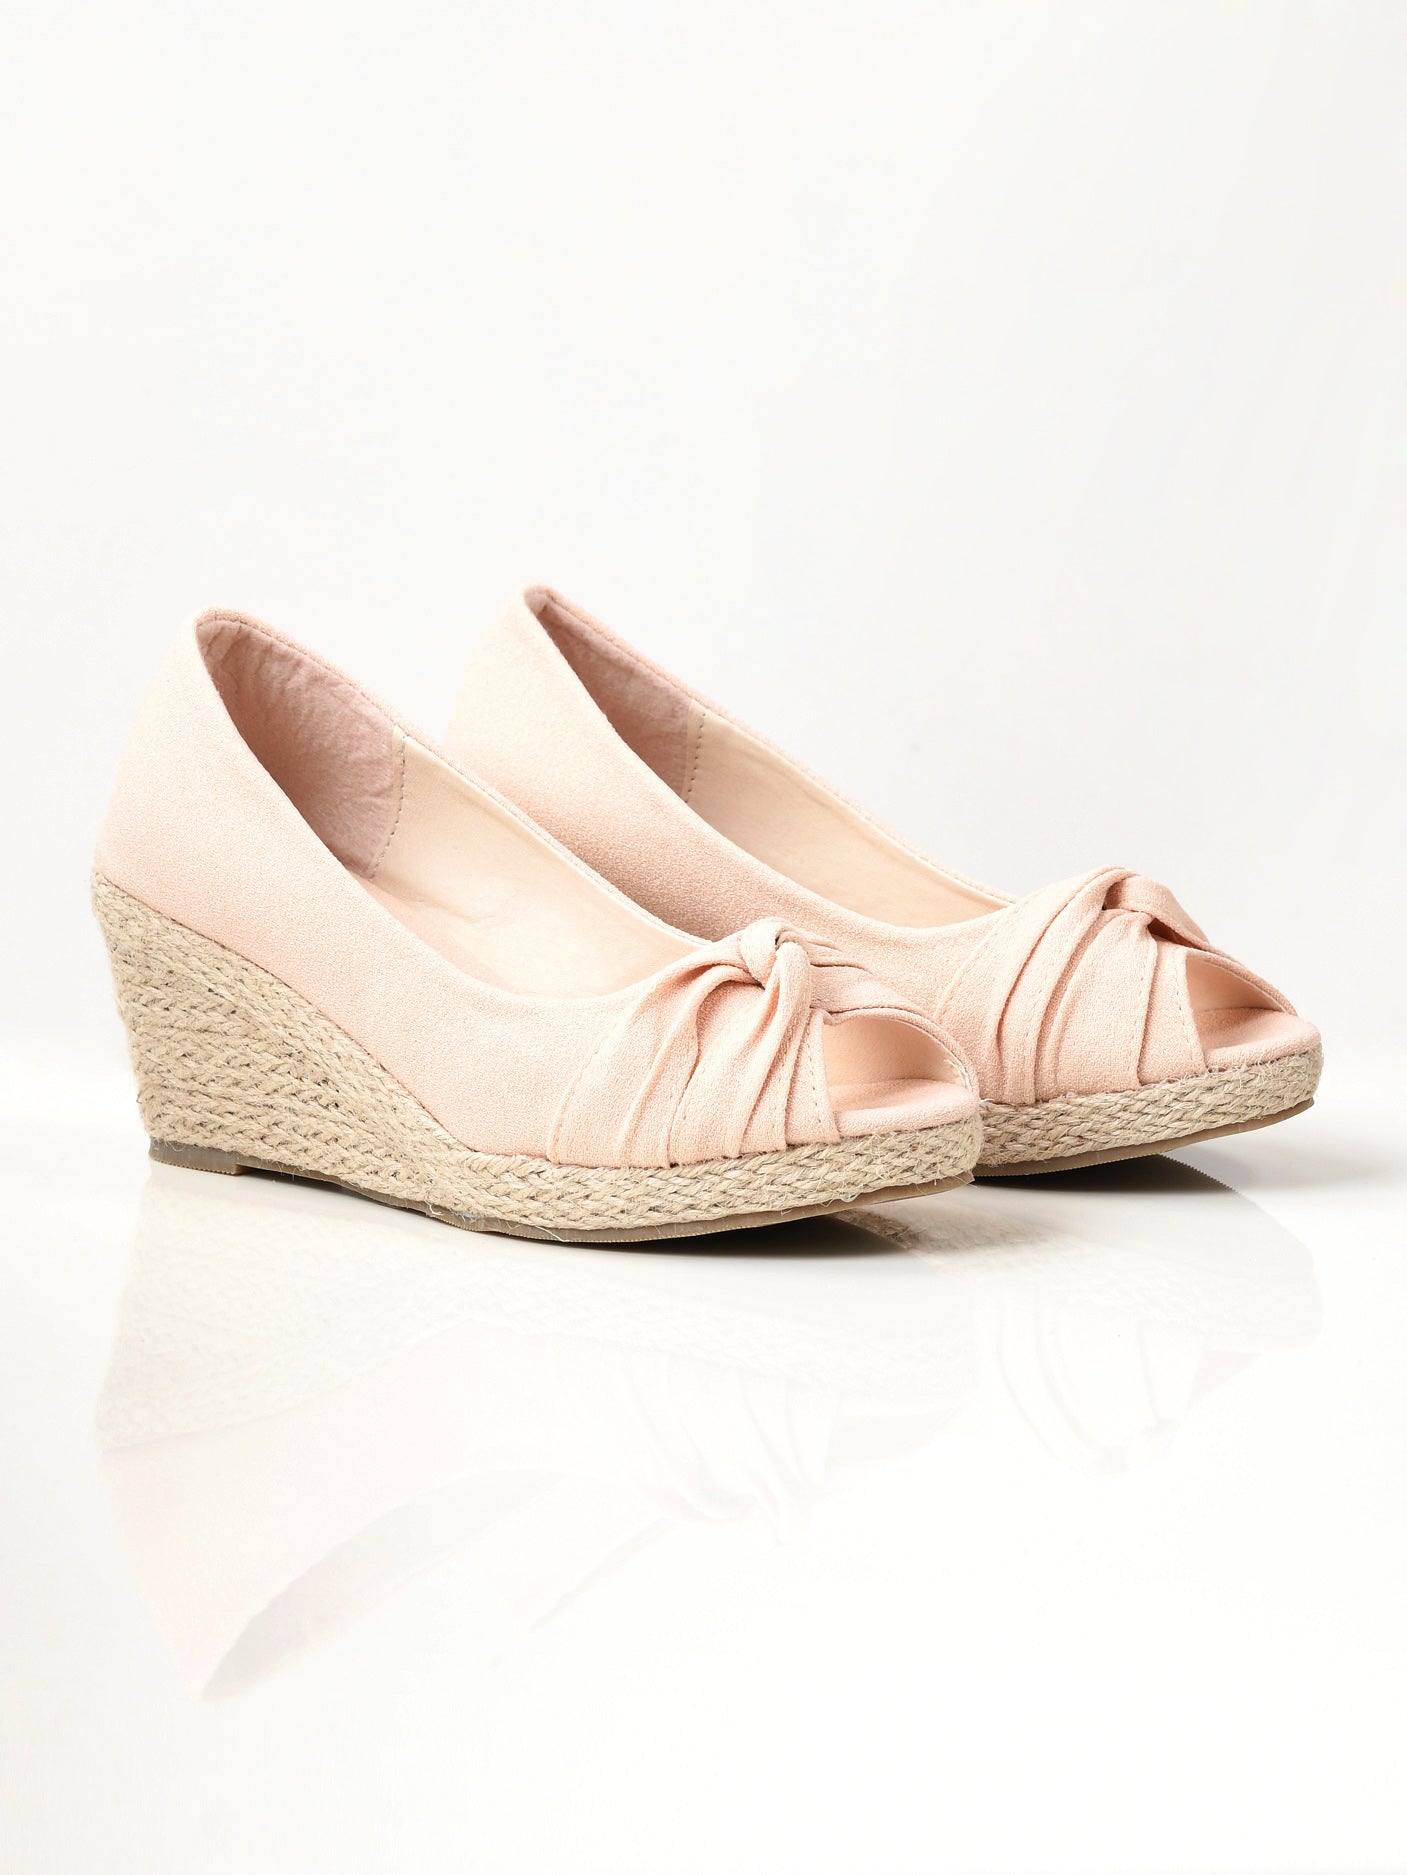 Knotted Weave Wedges - Light Peach